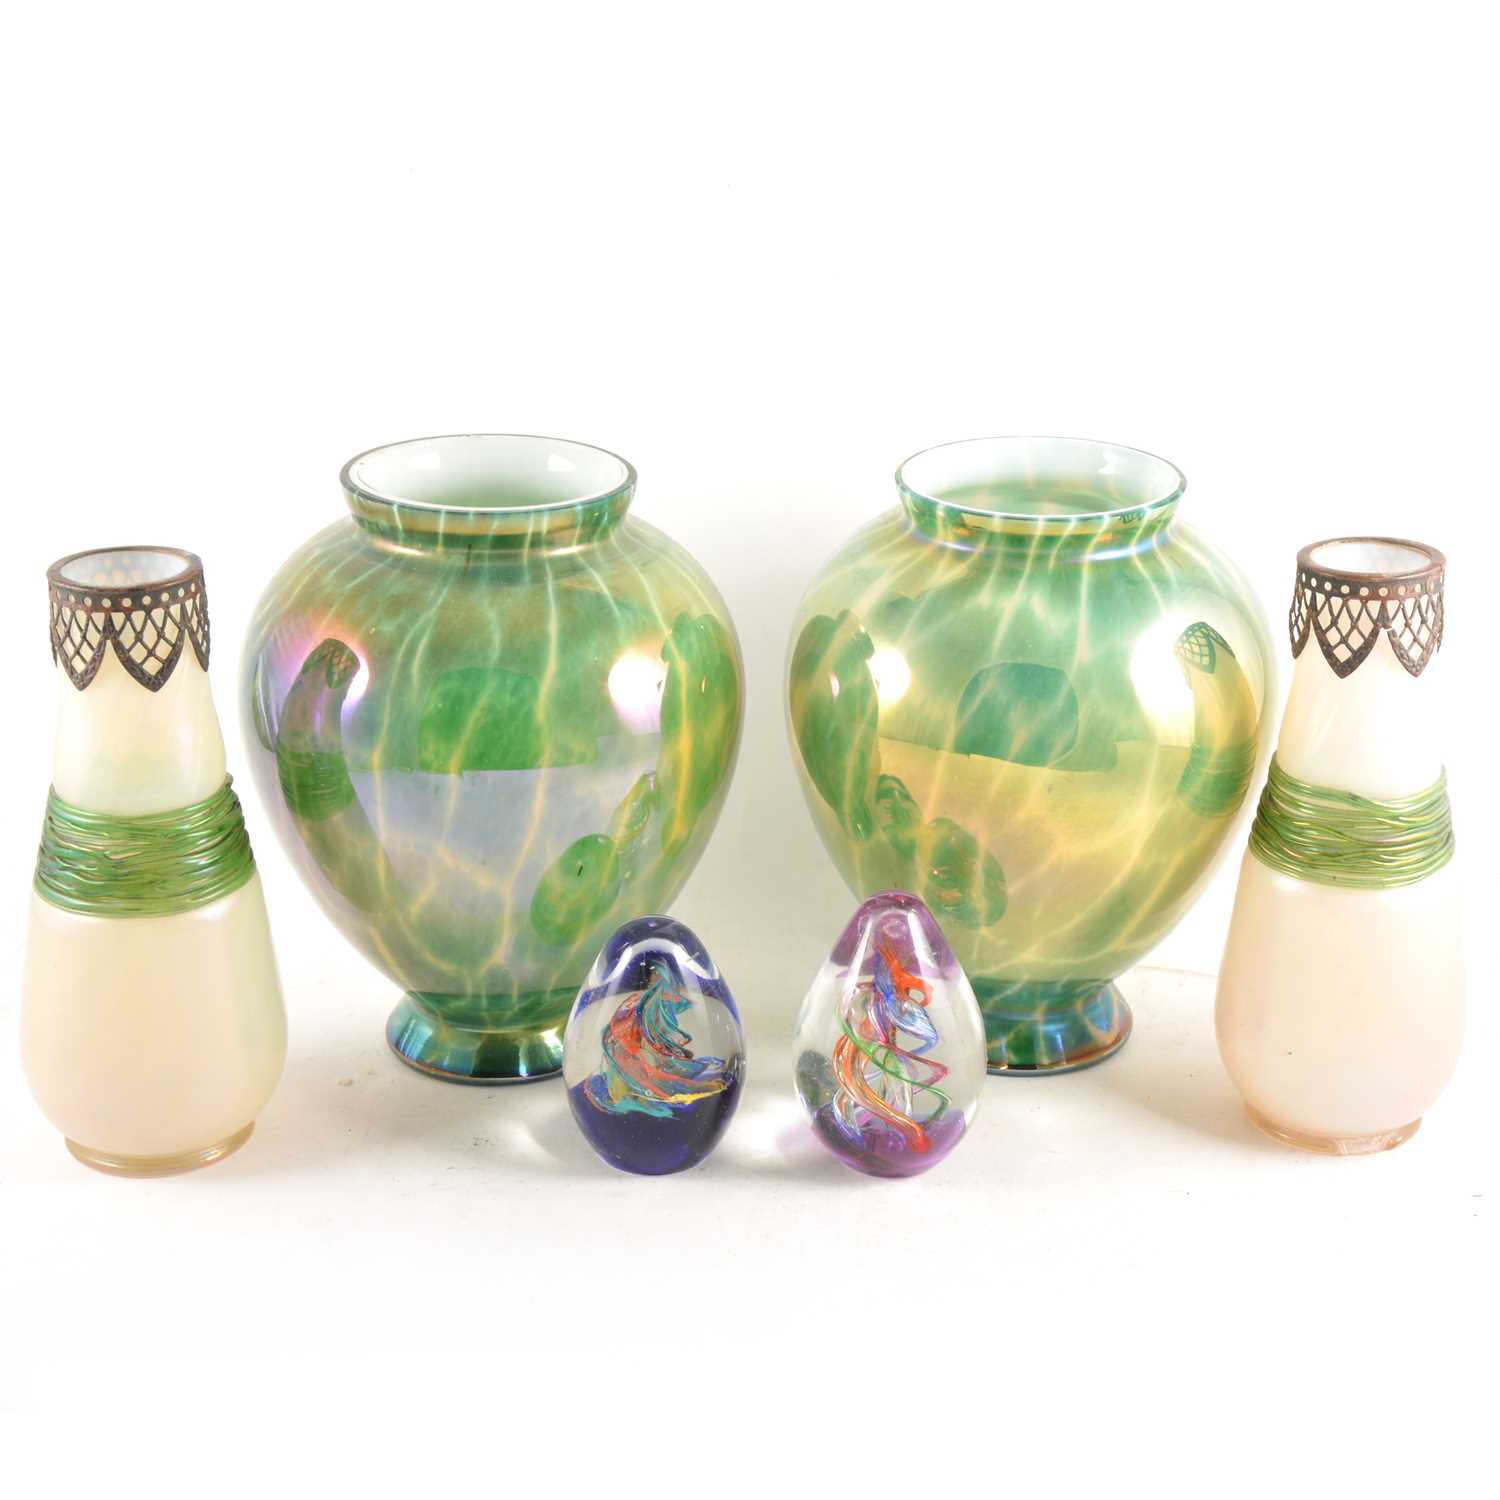 Lot 92 - Pair of iridescent glass vases and other decorative glass